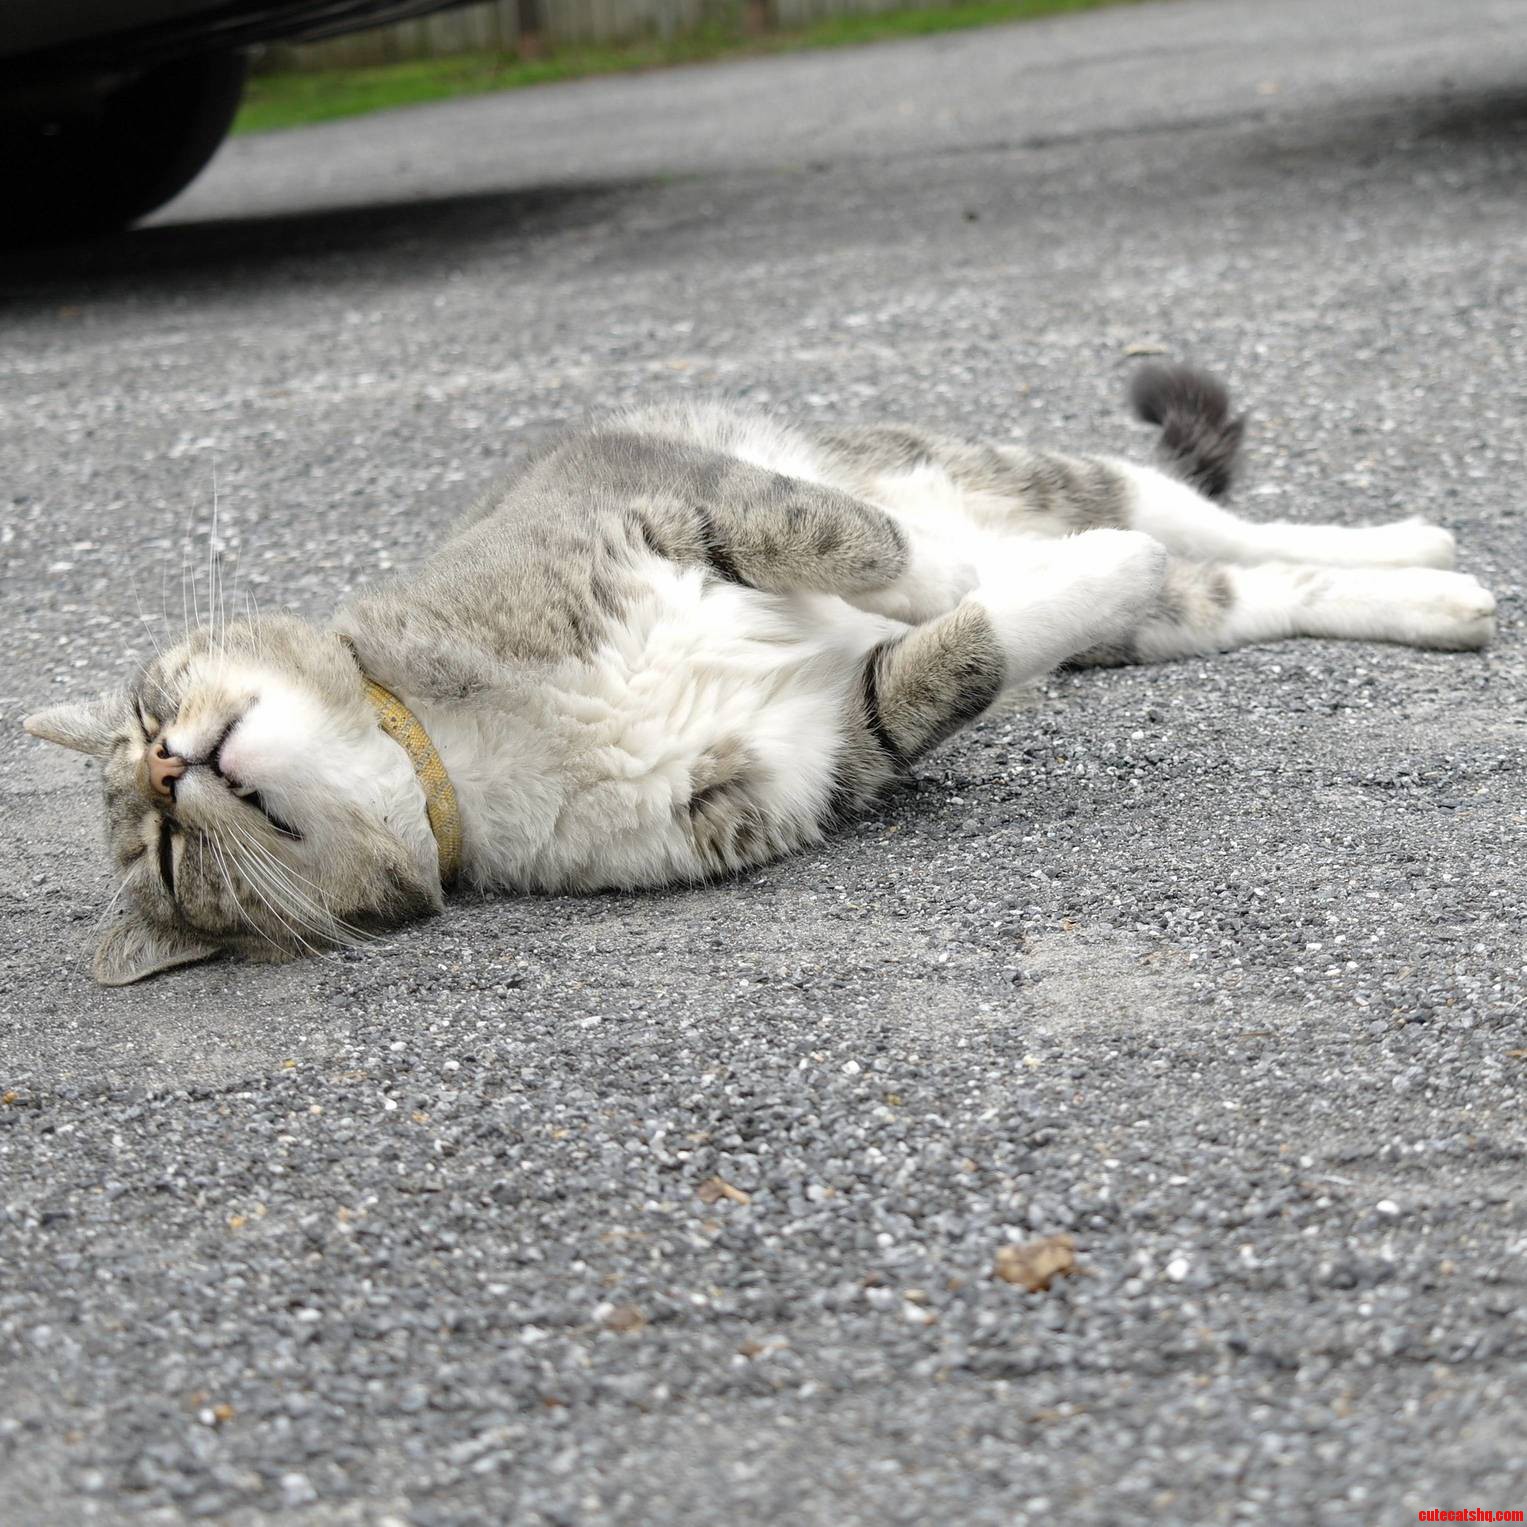 I Met A Cat In A Parking Lot. She Enjoyed Rolling In Gravel.